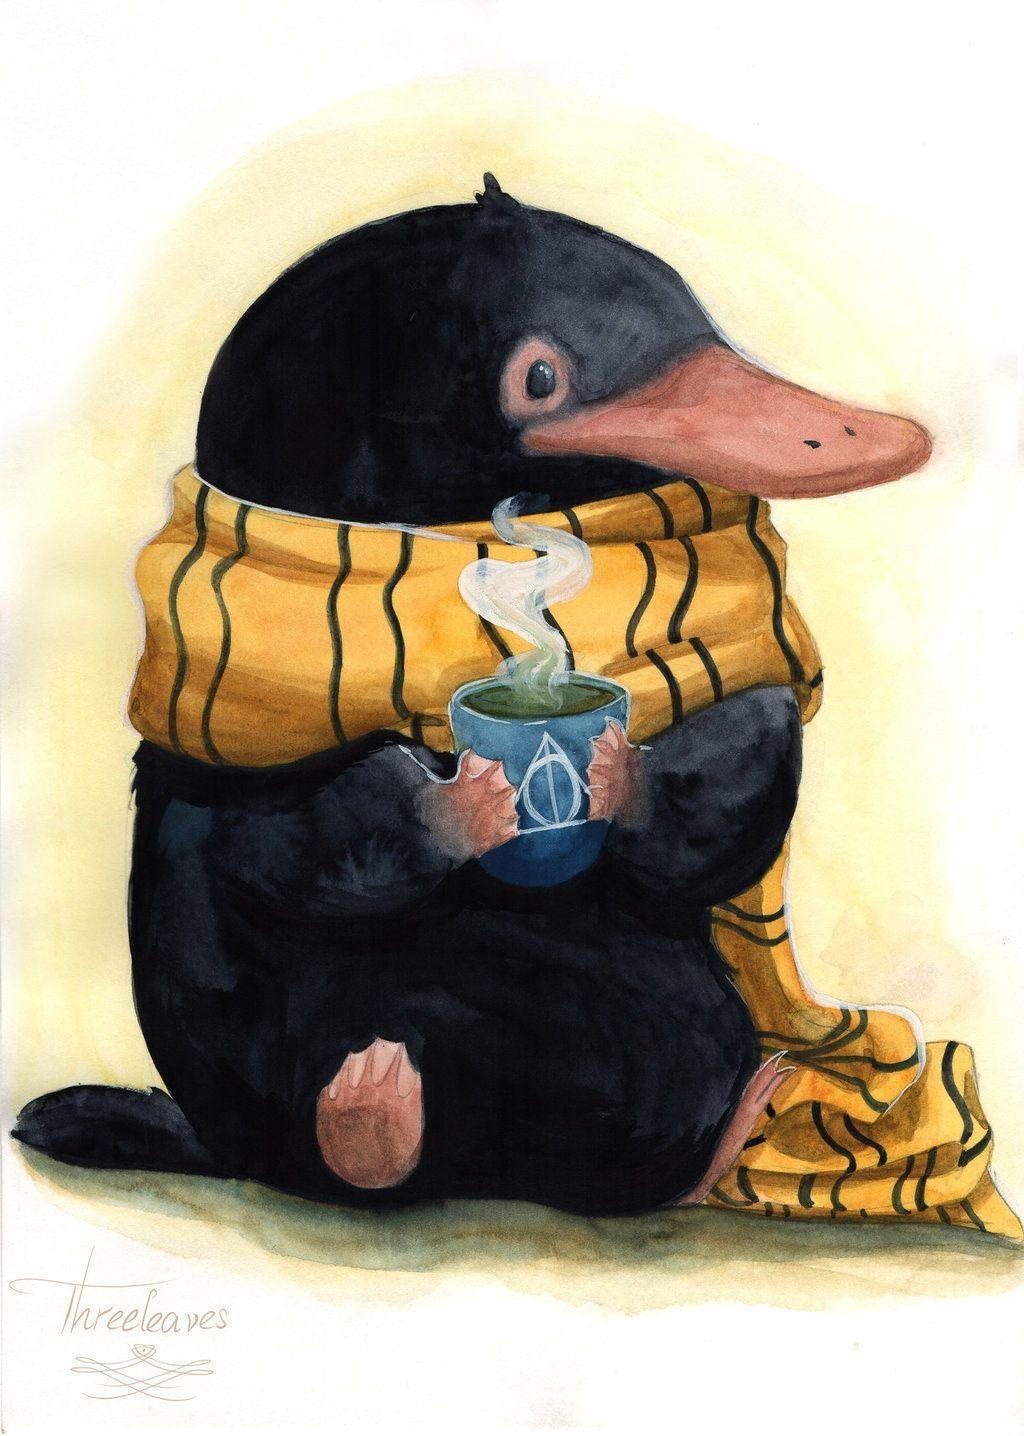 Just when you thought the Niffler couldn't get any cuter Threeleaves